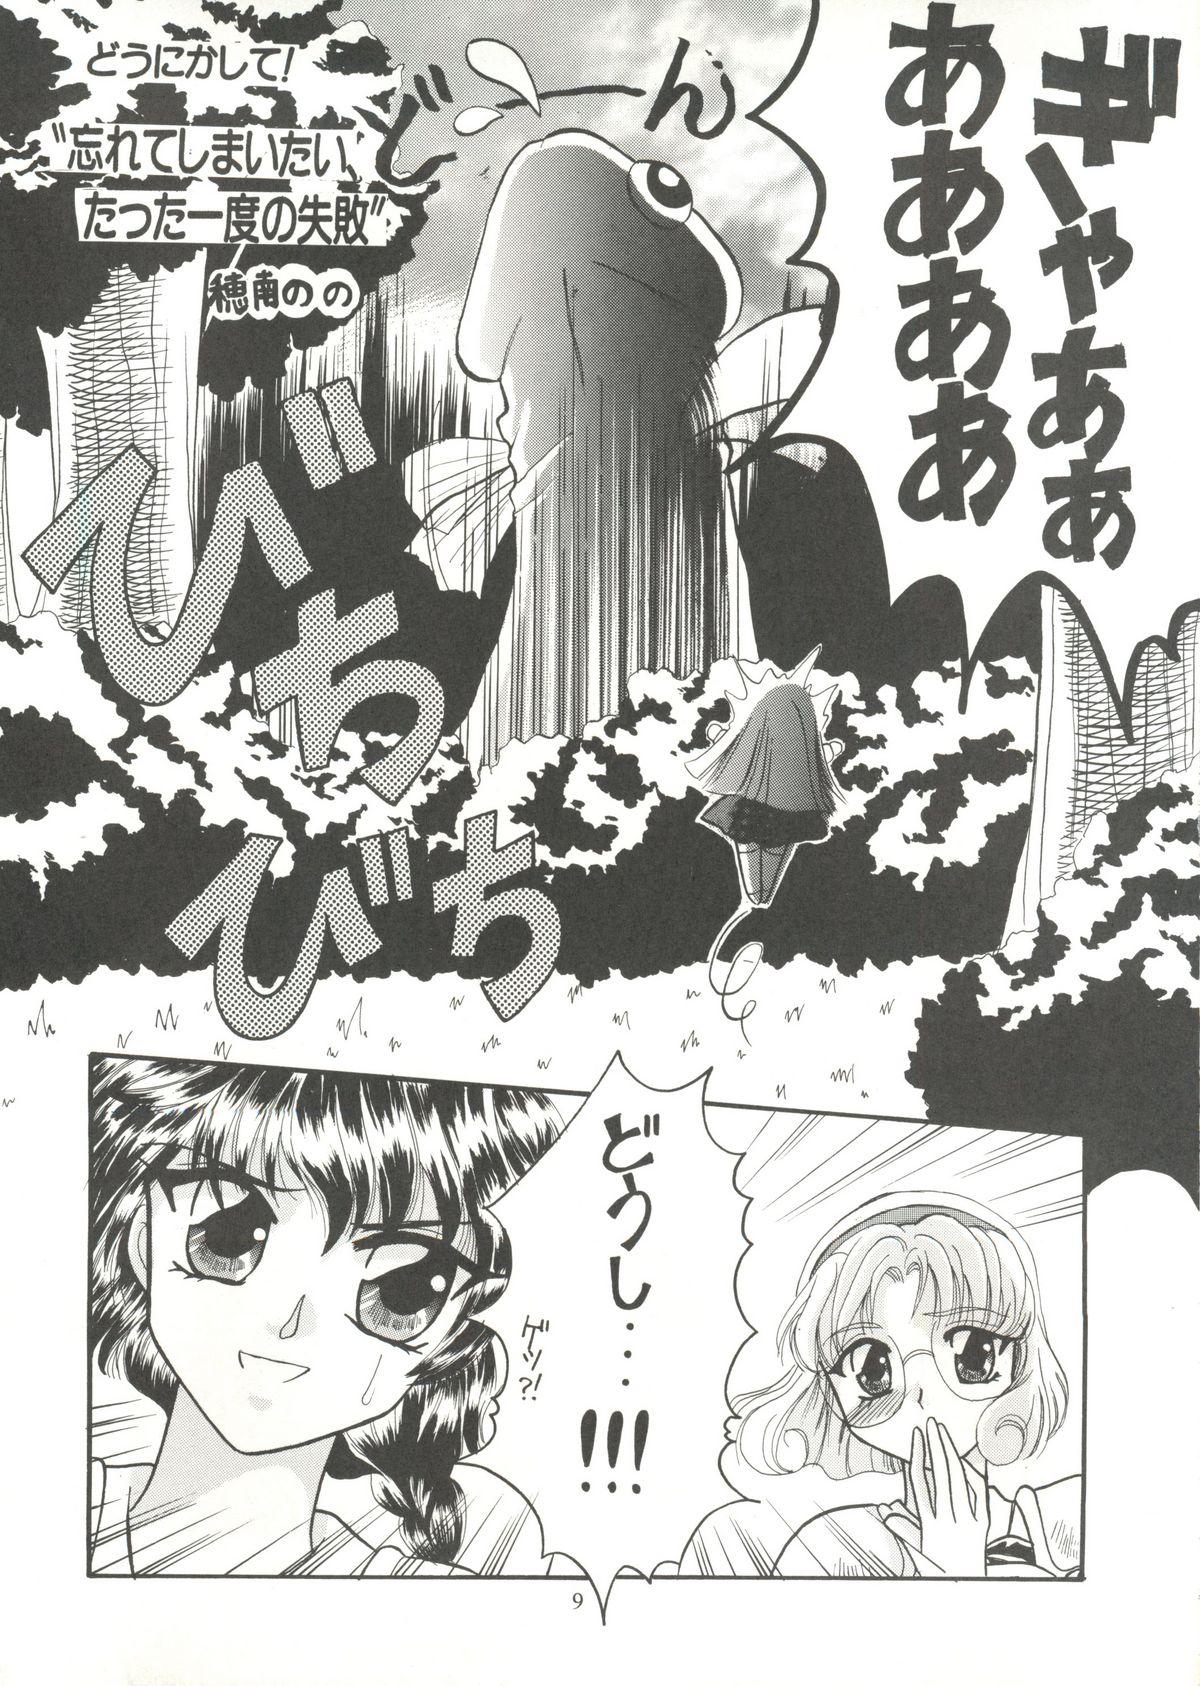 4some Motel - Magic knight rayearth Young Tits - Page 6